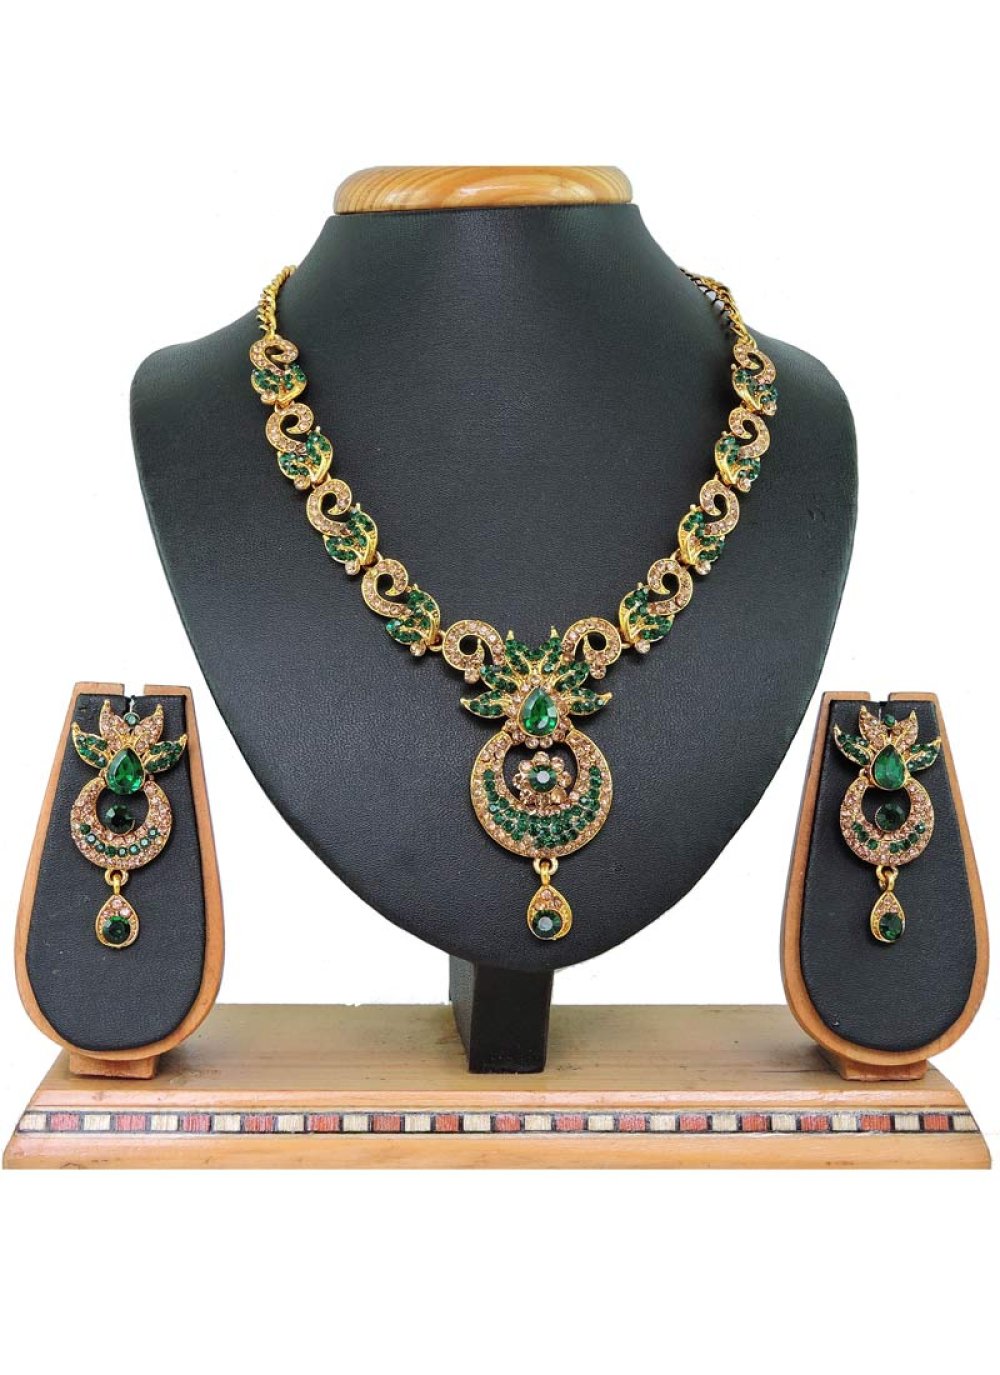 Lovely Gold Rodium Polish Necklace Set For Ceremonial